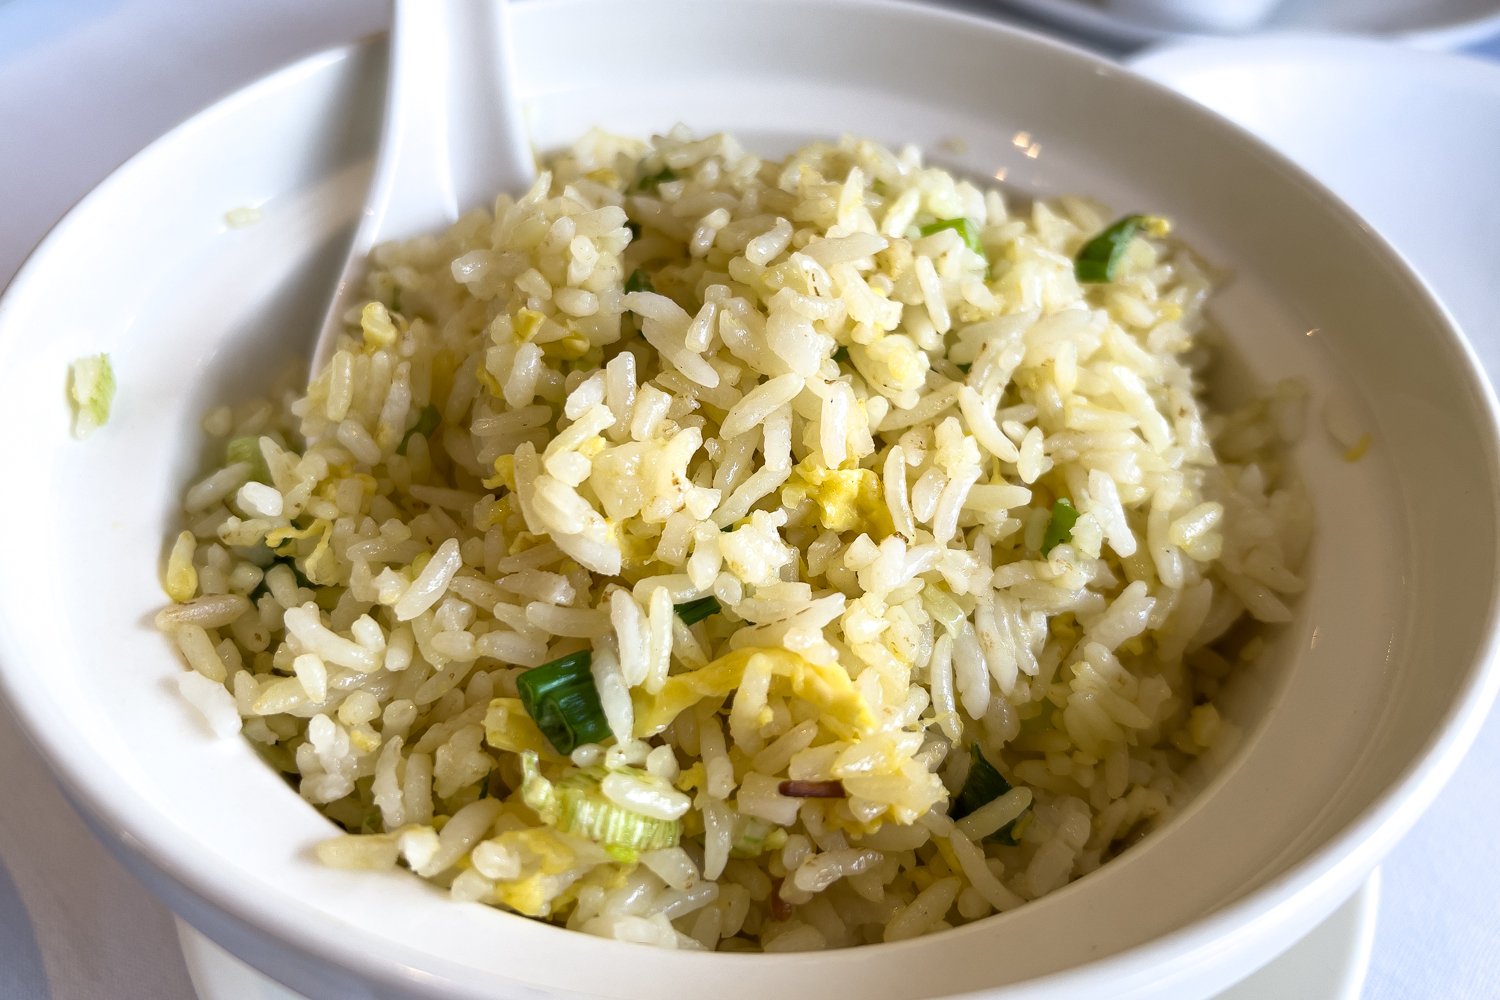  Egg fried rice: With limited shellfish for me, this was the next best option for carb. 